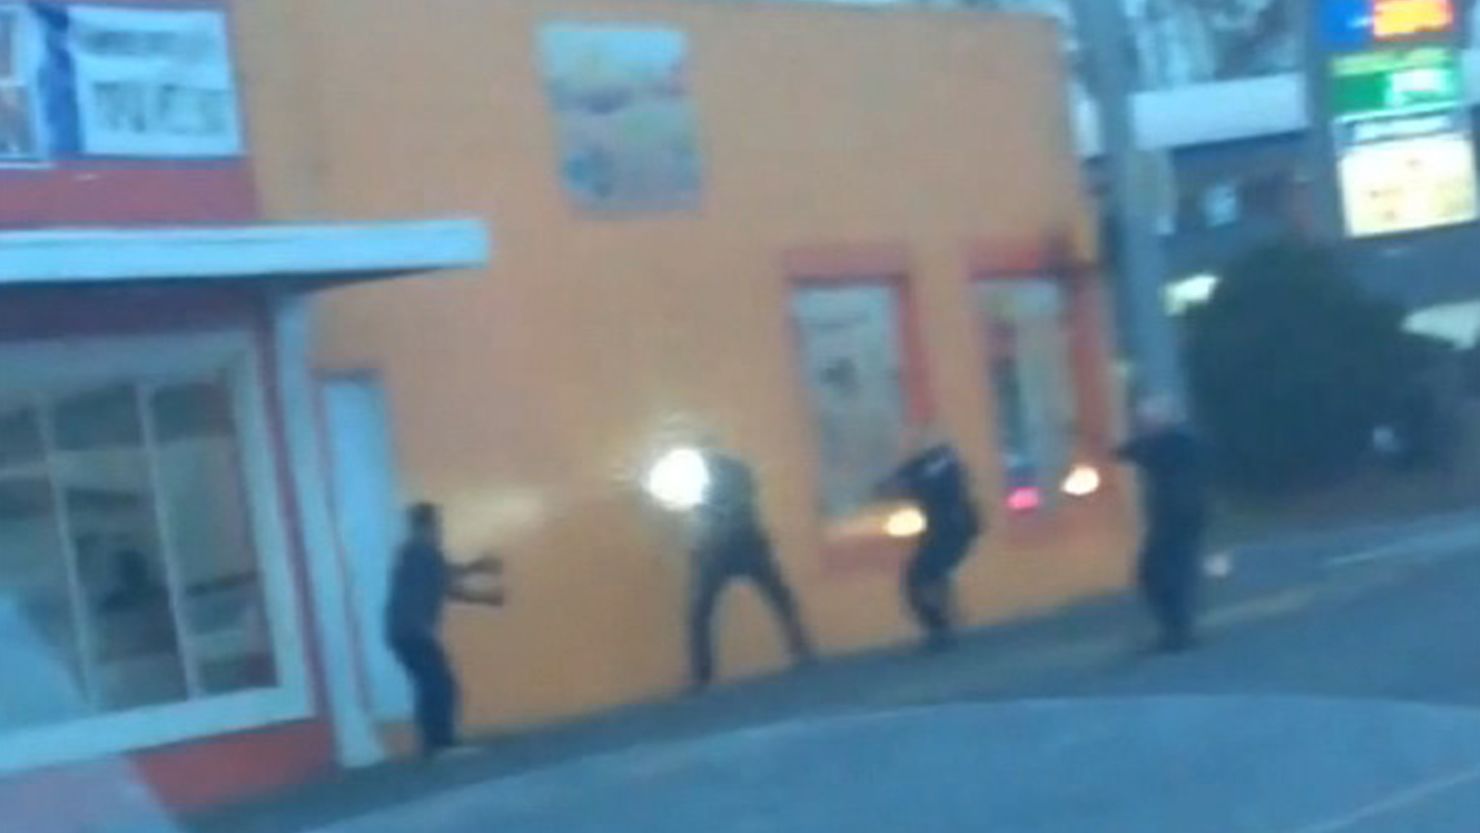 In an frame taken from a YouTube video posted by Dario Zuniga, Antonio Zambrano-Montes, 35, (far left) is seen immediately before he was fatally shot by Pasco, Washington, police officers who confronted him (three, to the right).  The officer closest to him is holding a flashlight.